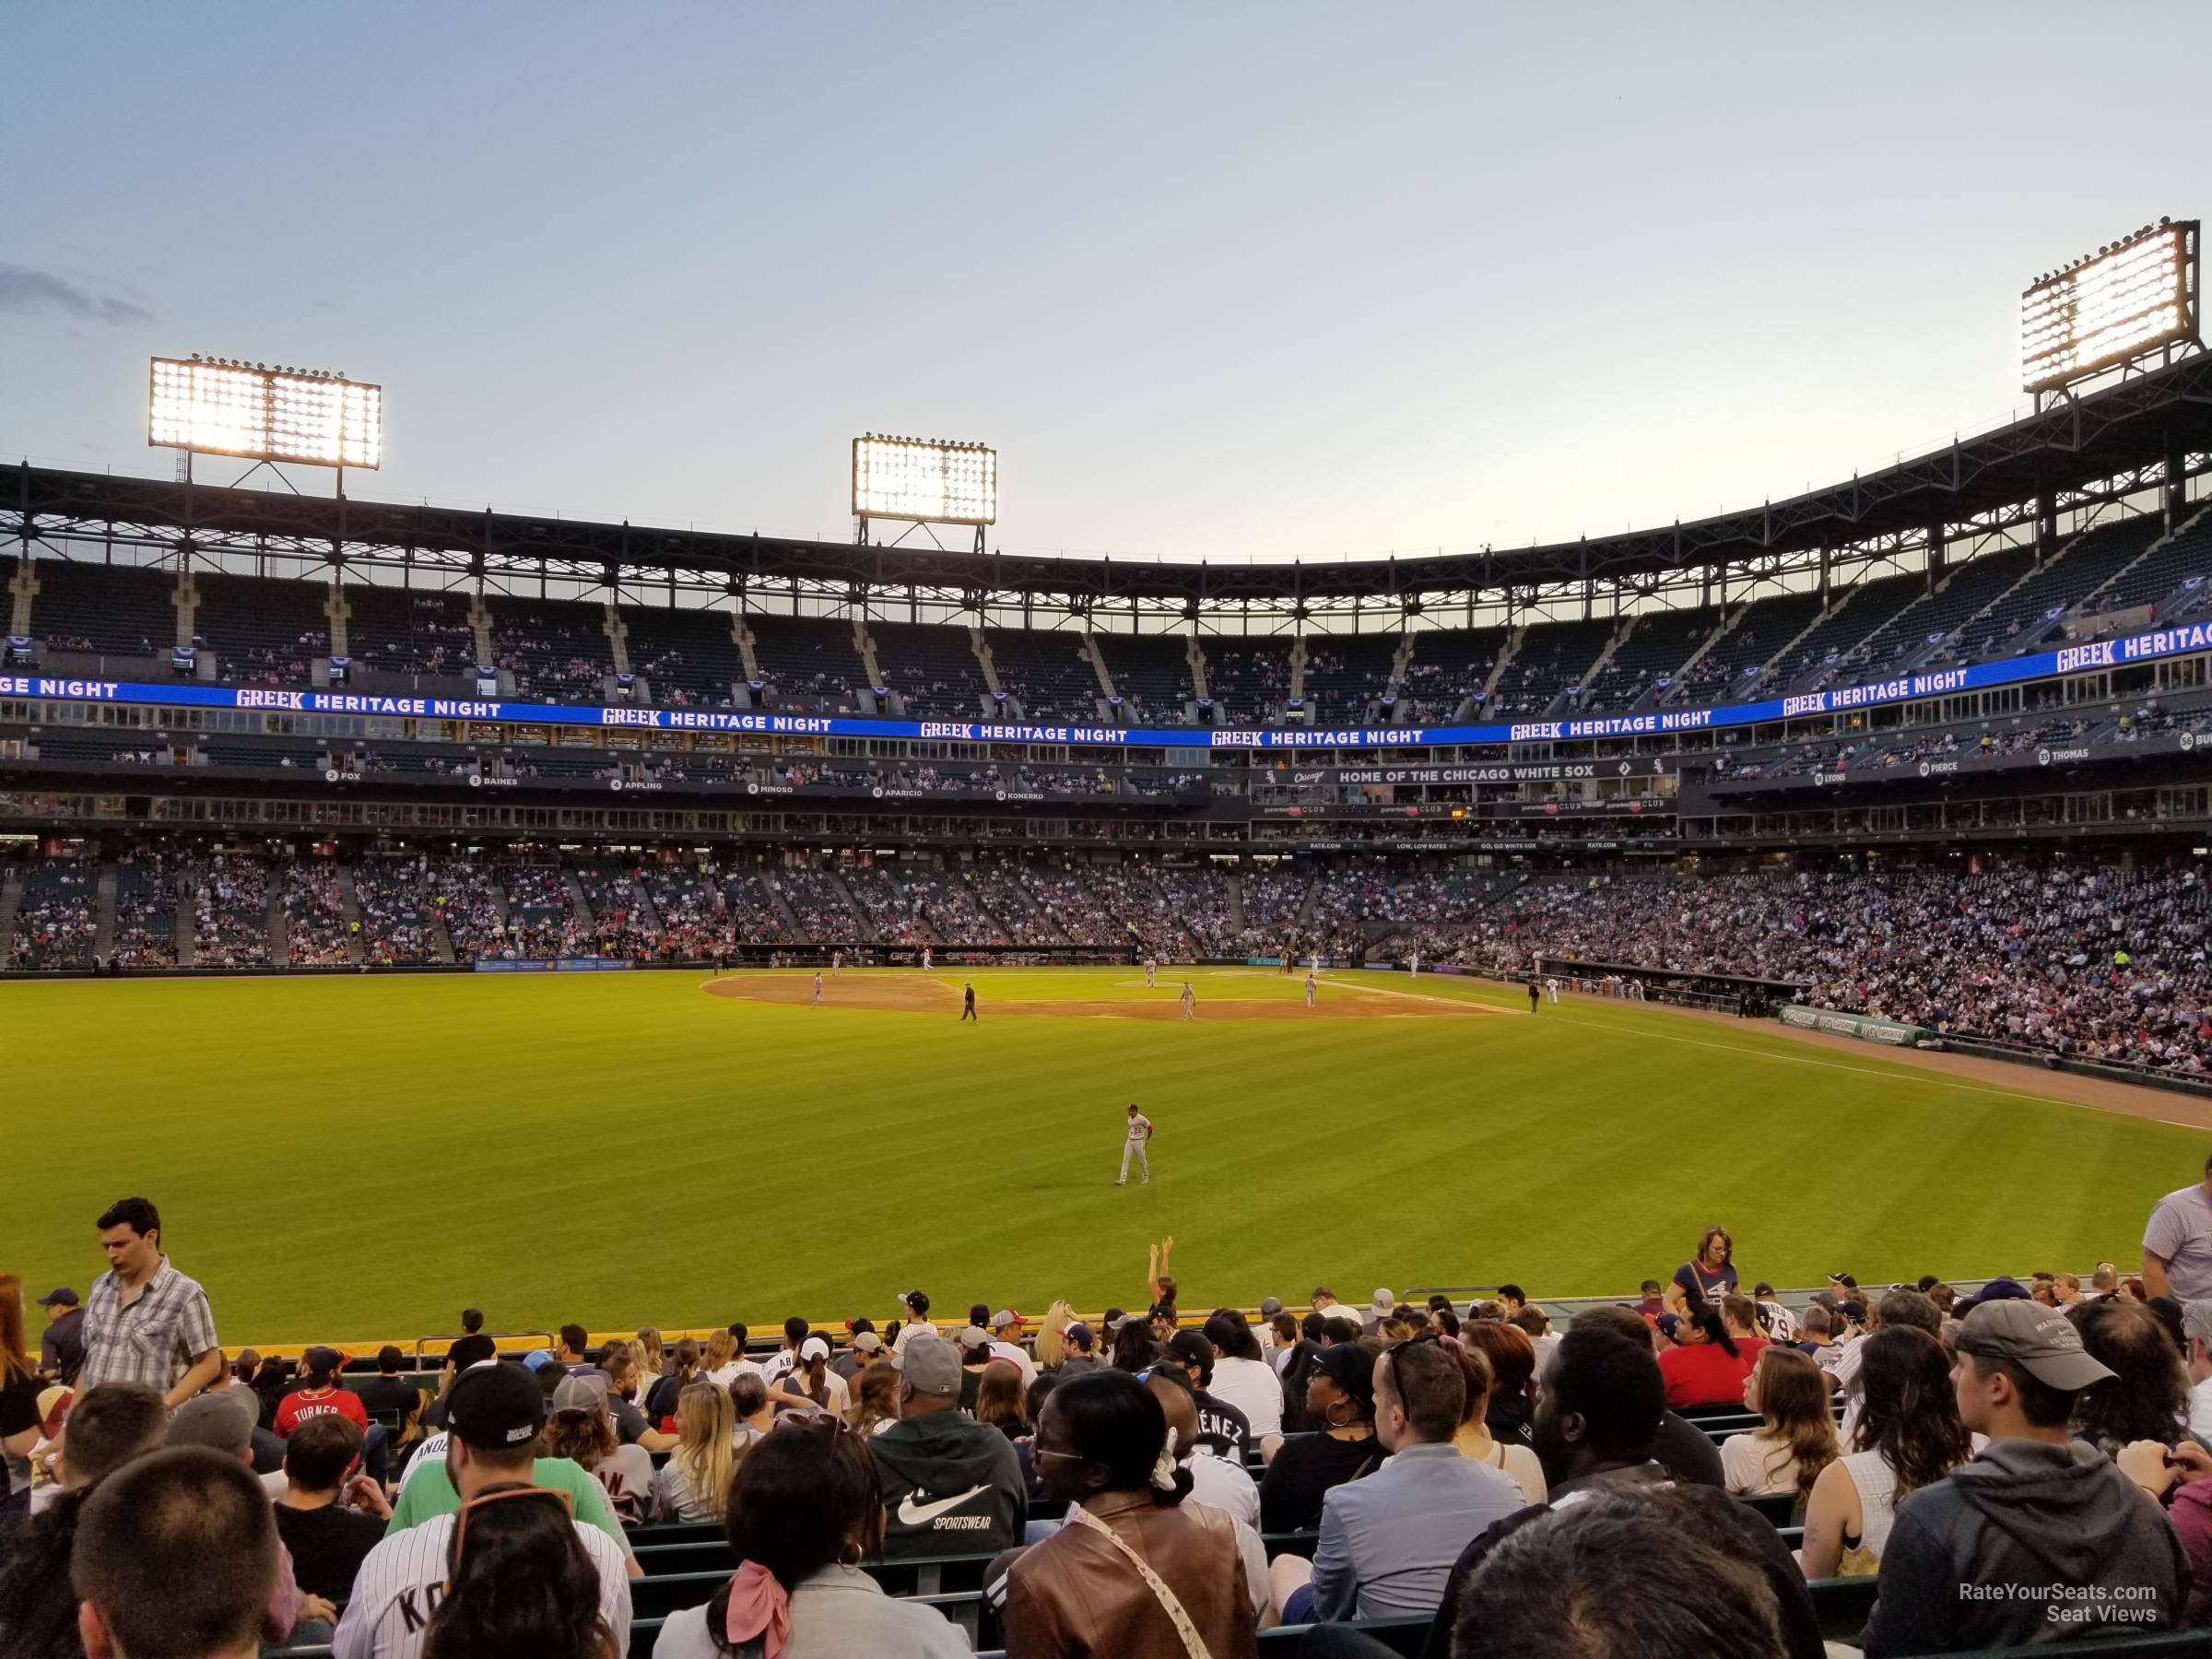 Sox Machine: Chicago White Sox Crazy New Seat Map for 2023 